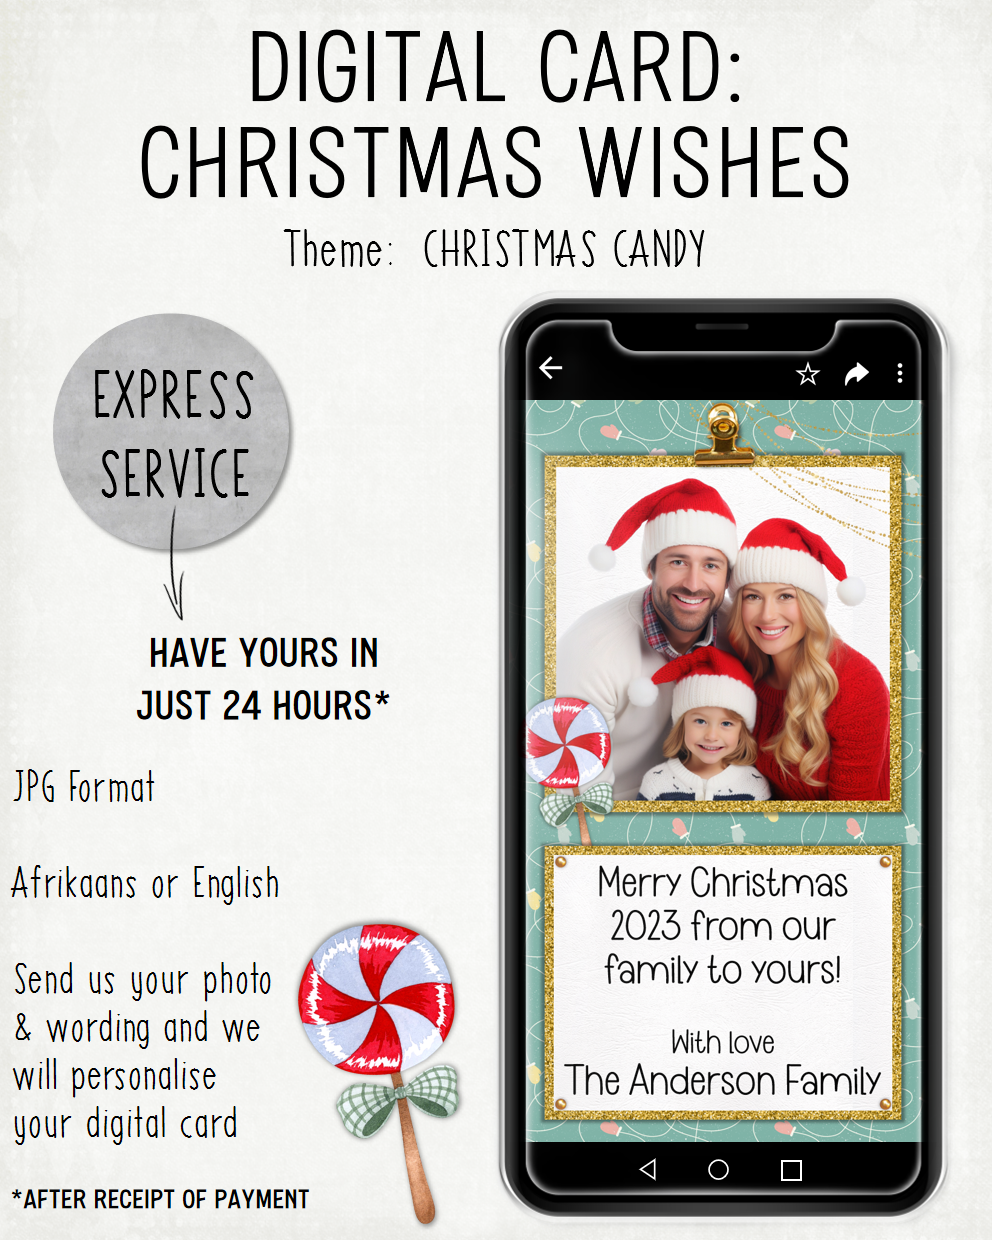 DIGITAL CARD;  Christmas Wishes 2023 - Christmas Candy (Afrikaans / English)